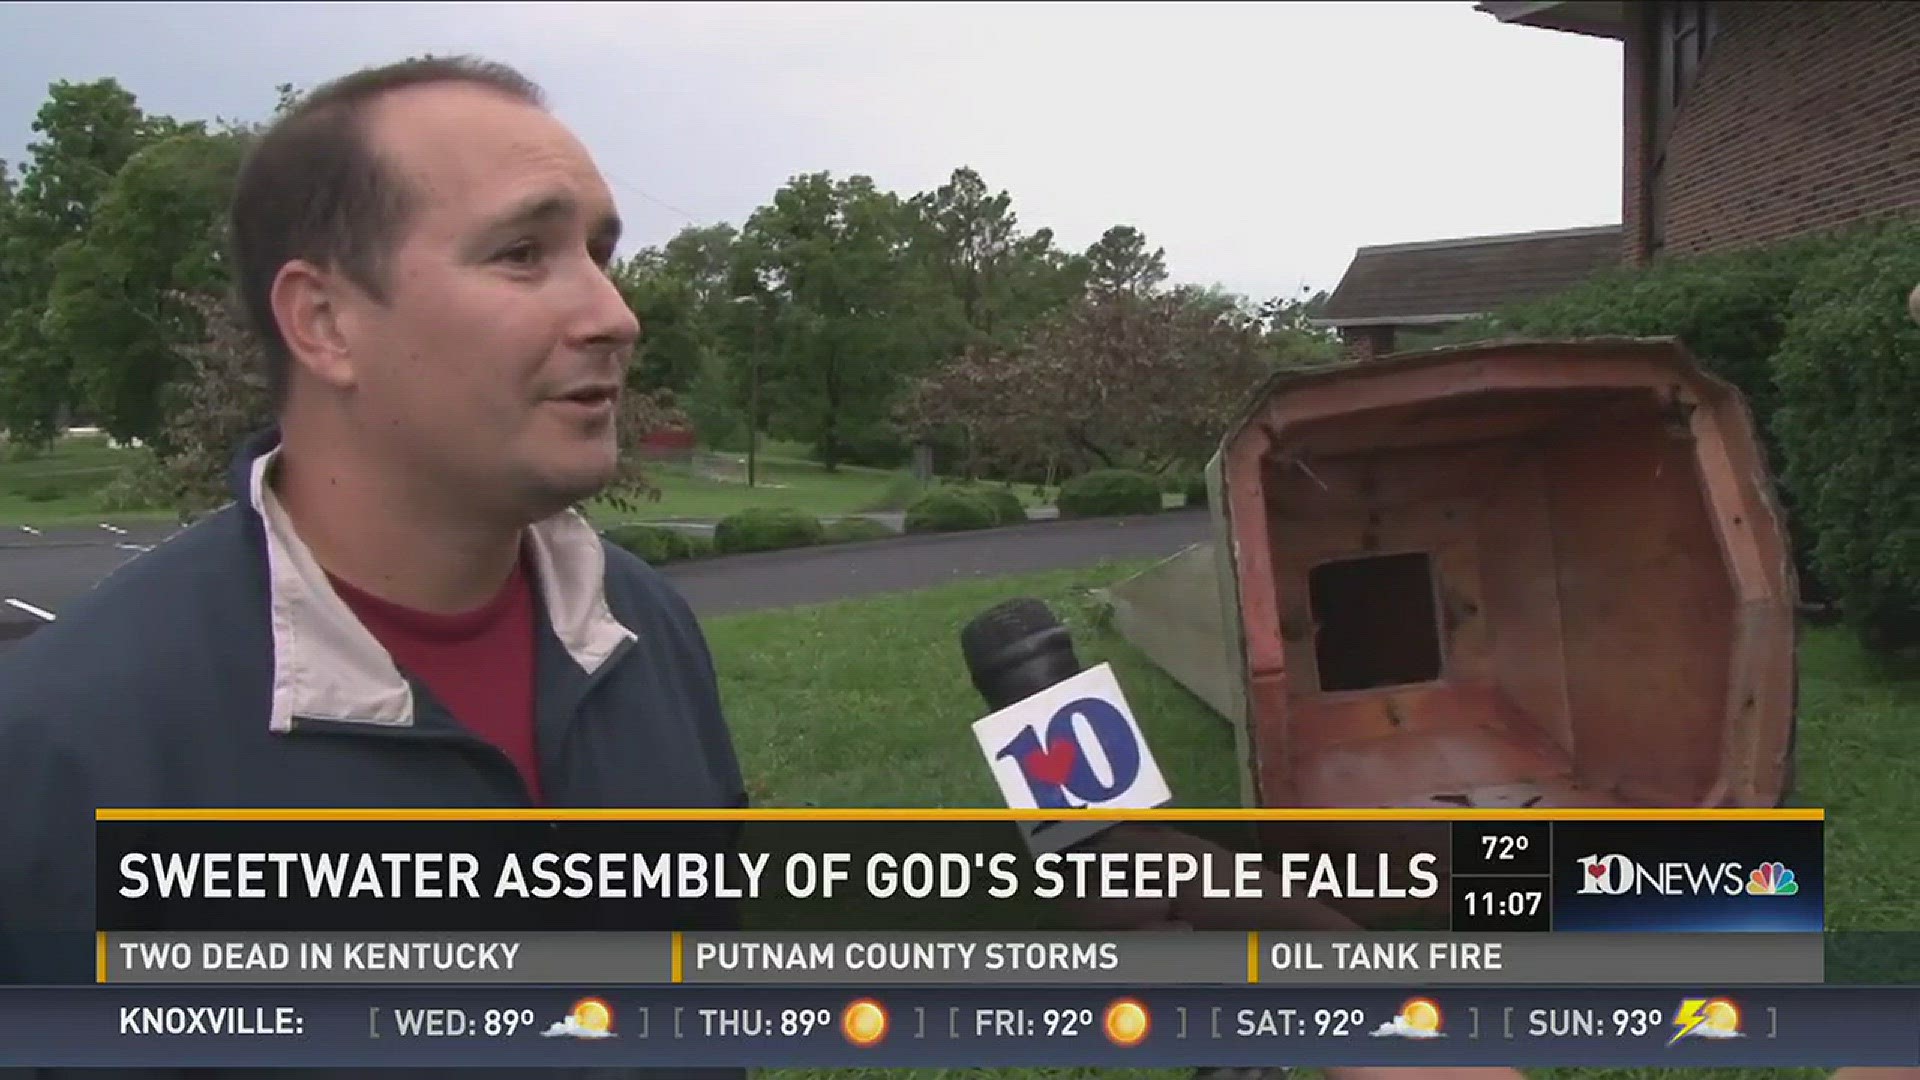 A Sweetwater church's steeple had endured past storms. But Tuesday's storm was too much. July 14, 2015